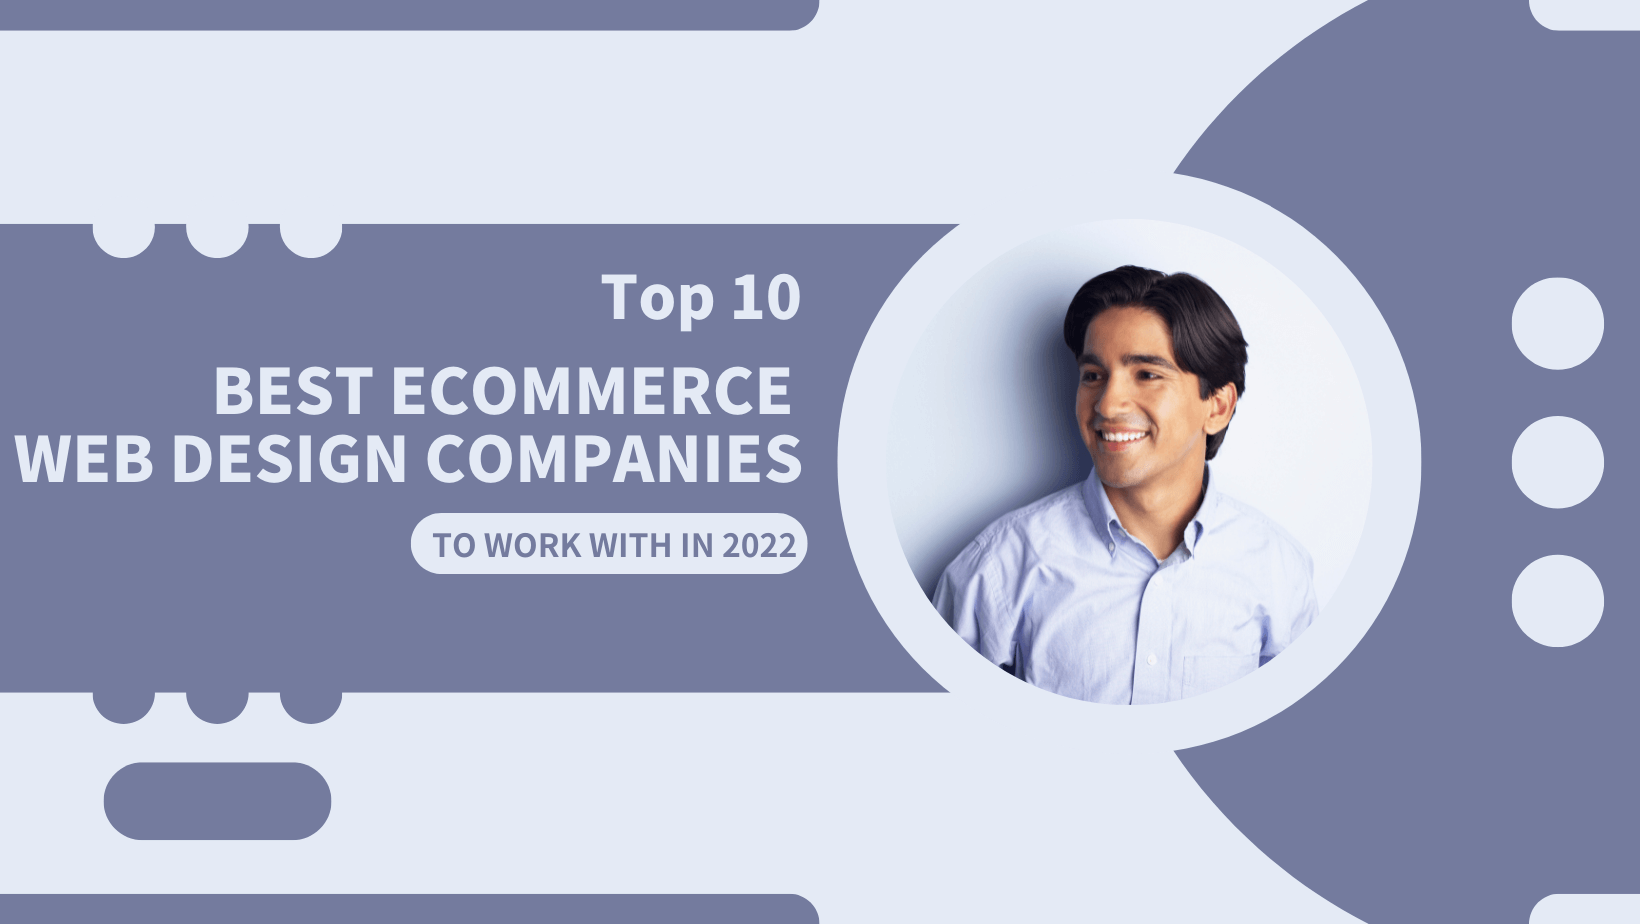 Top 10 Best eCommerce Web Design Companies to Work With In 2022